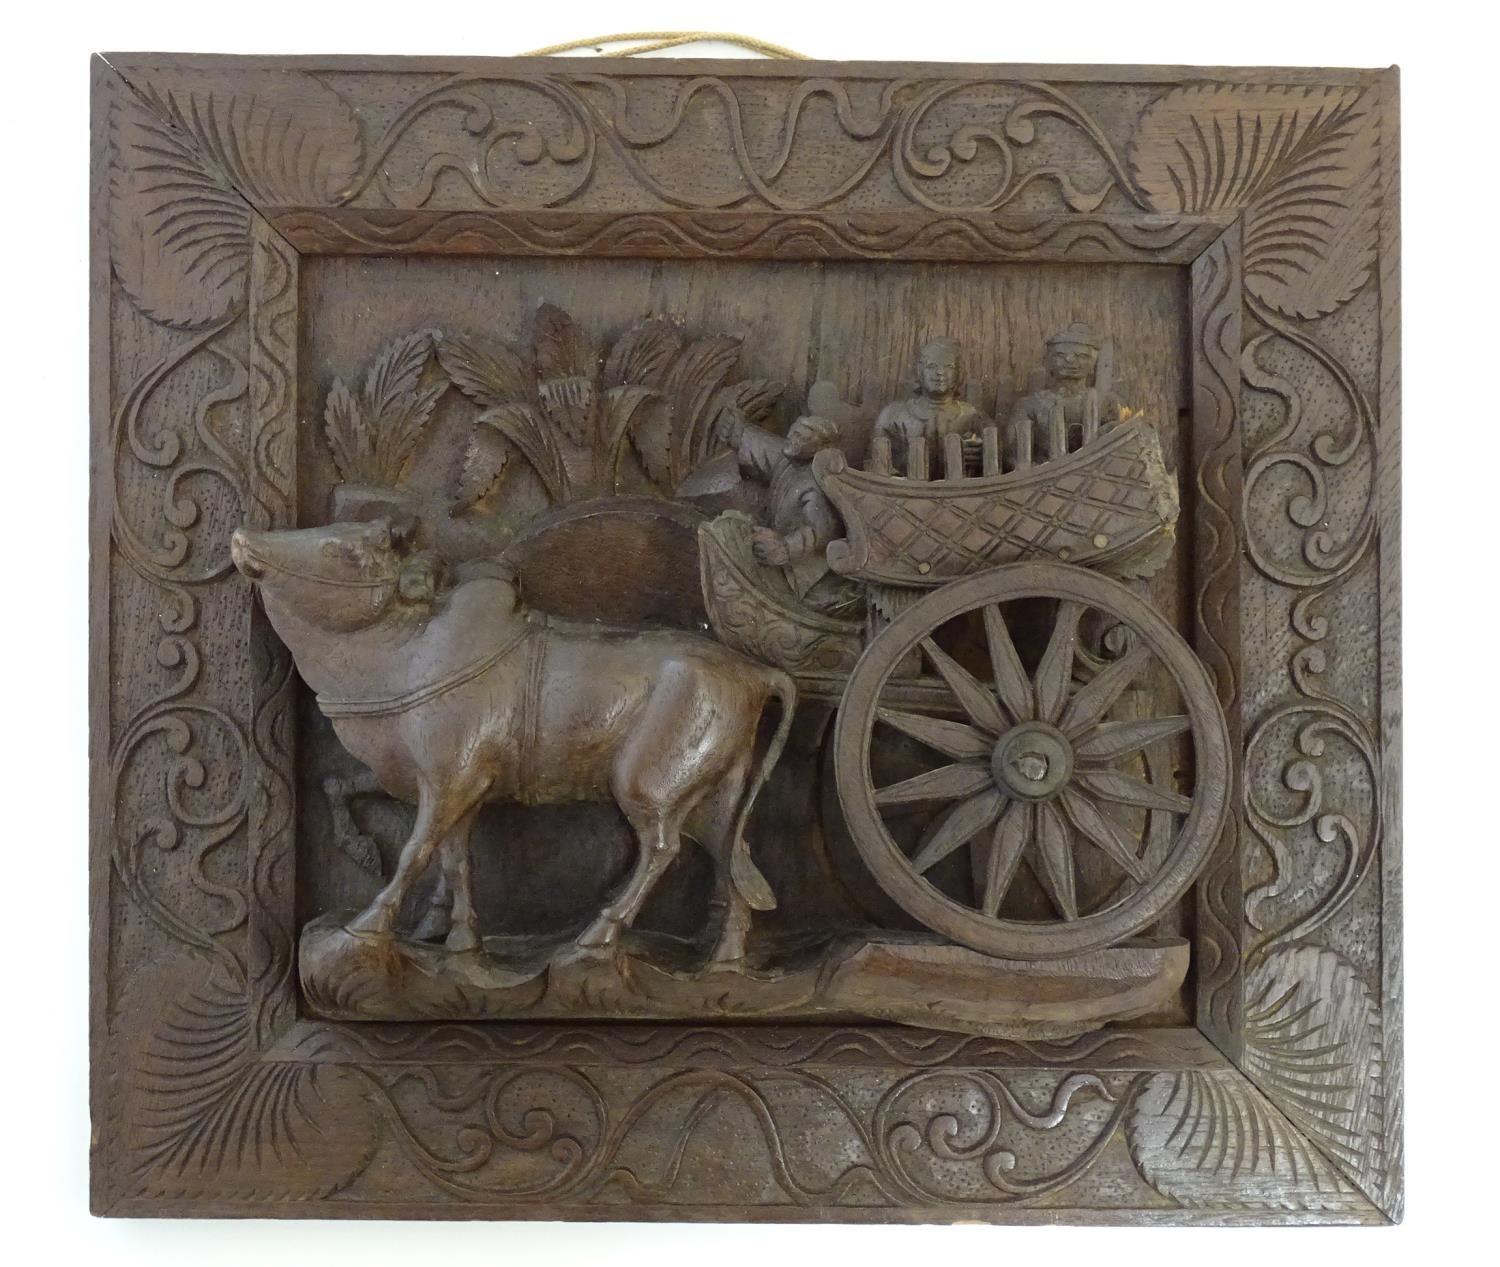 A 20thC Chinese carved wood wall plaque depicting oxon pulling a cart with figures, the border